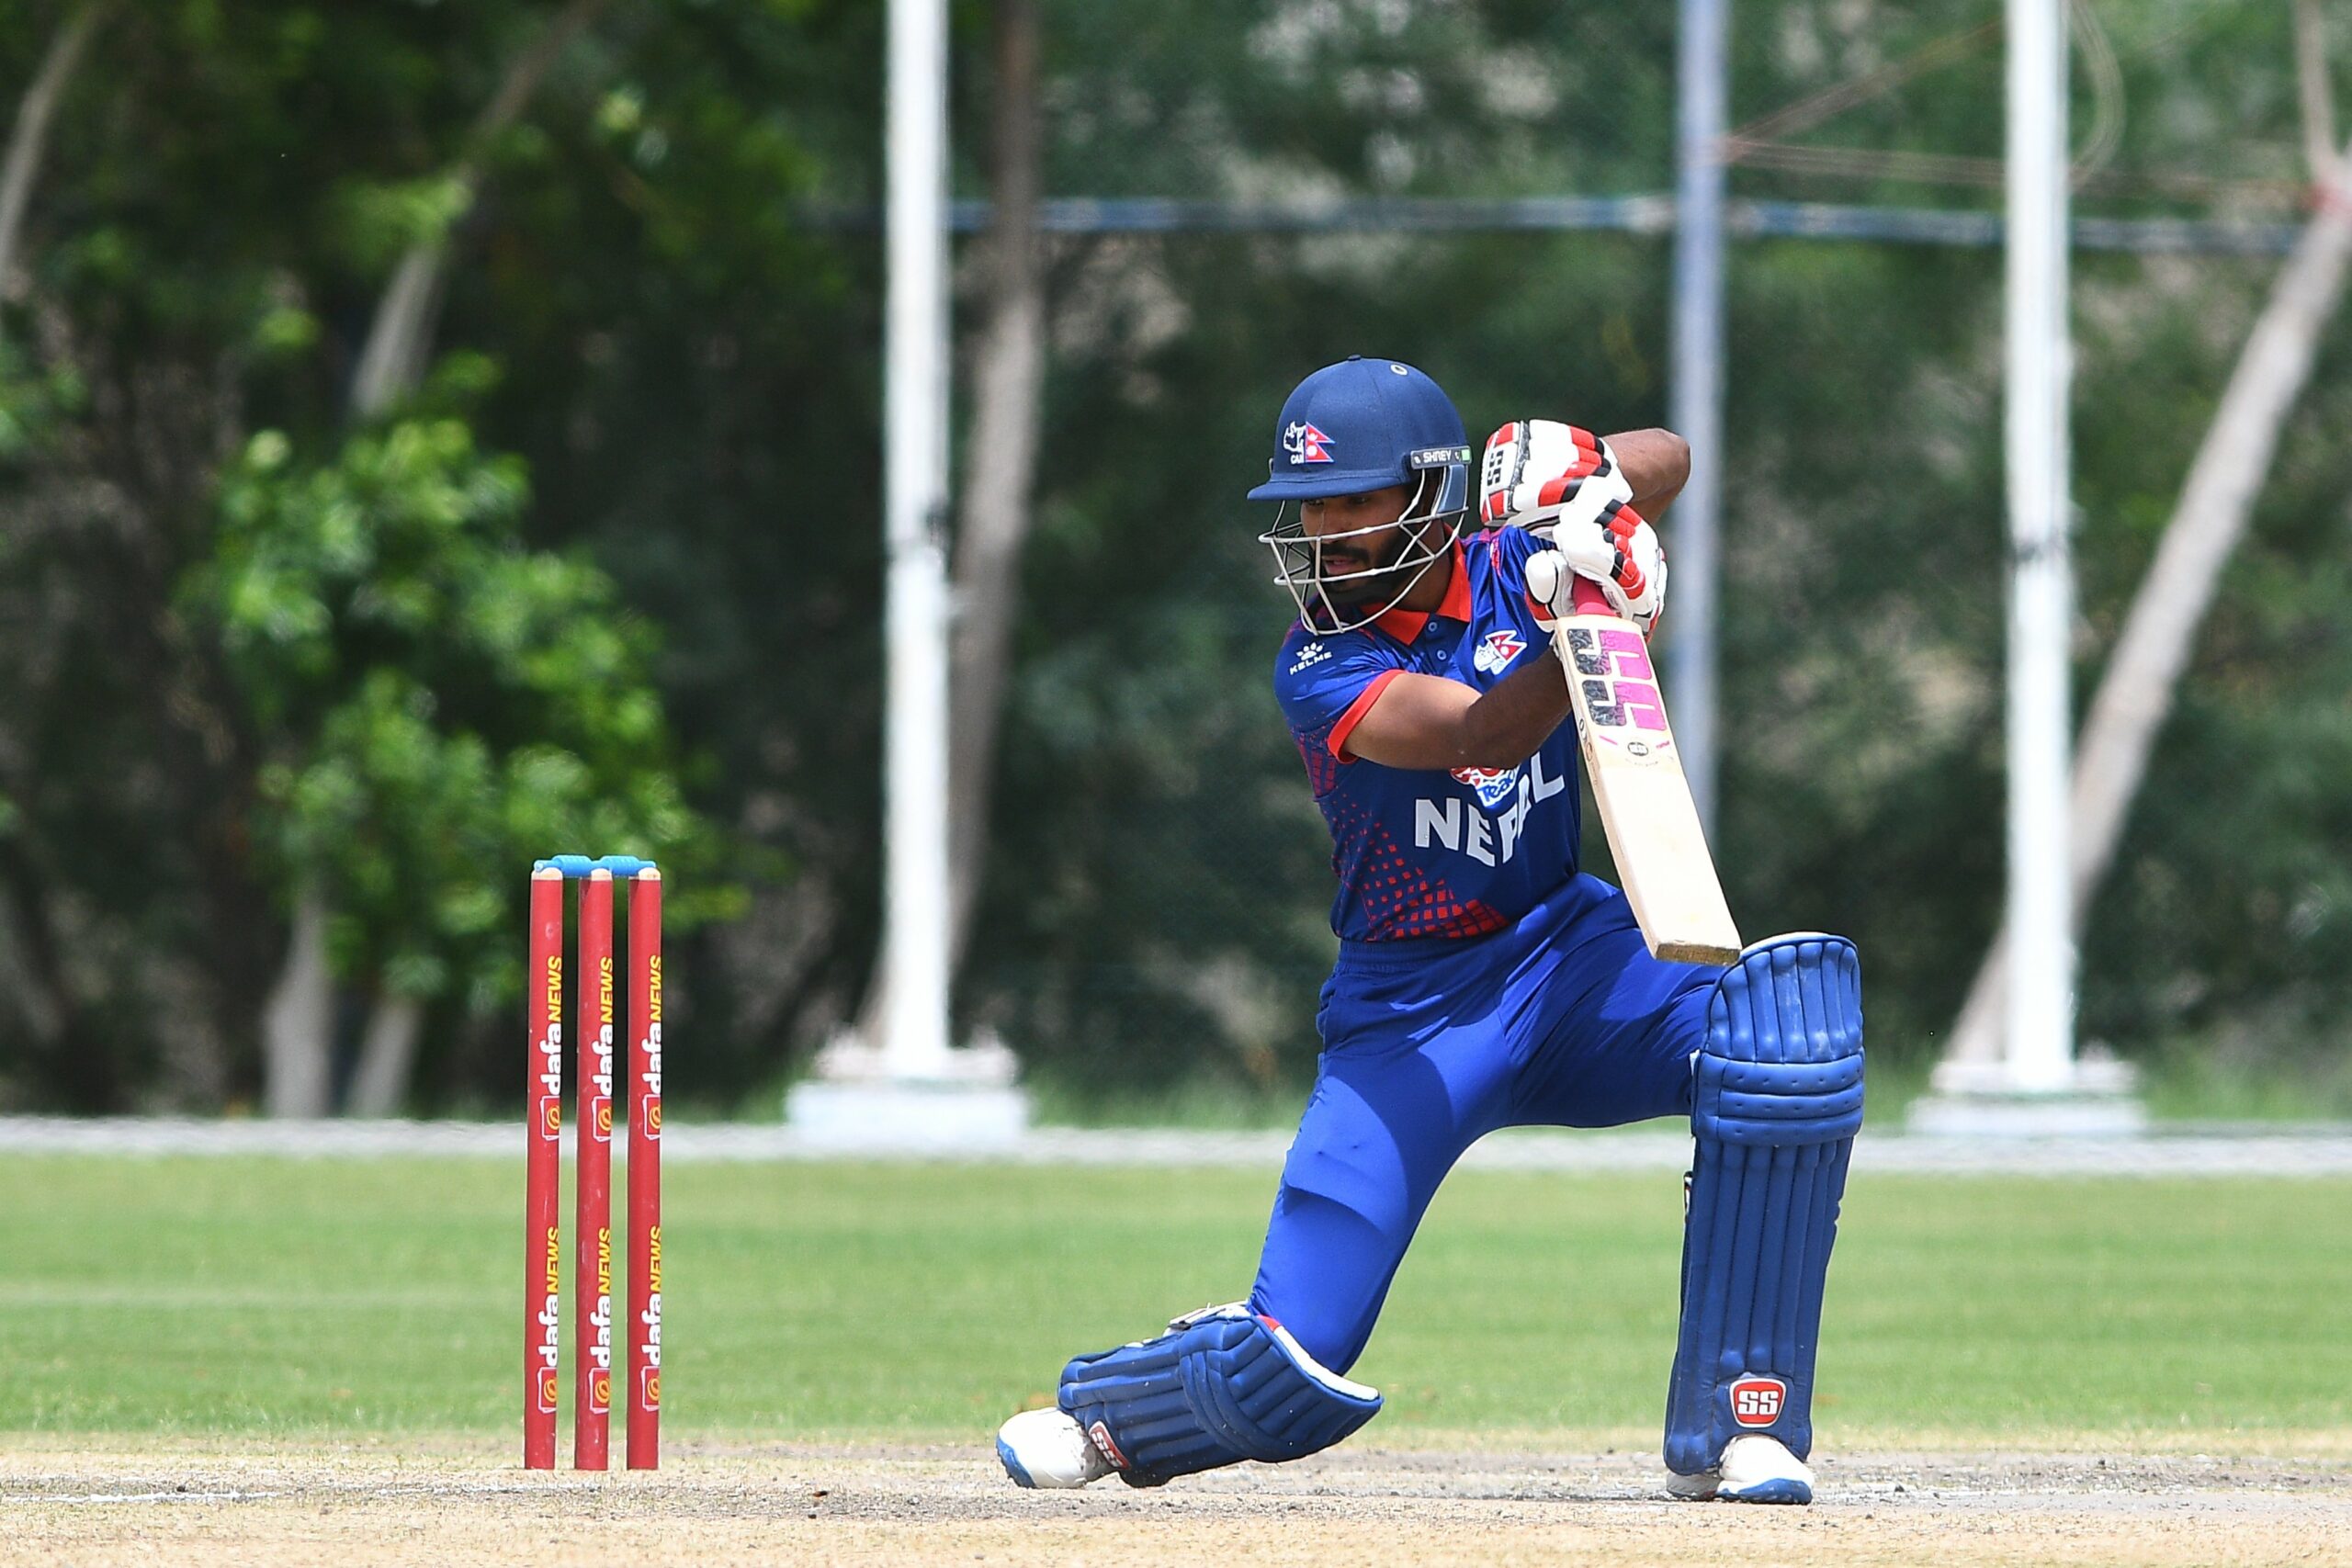 Early setback for Nepal as two wickets fall in powerplay against UAE